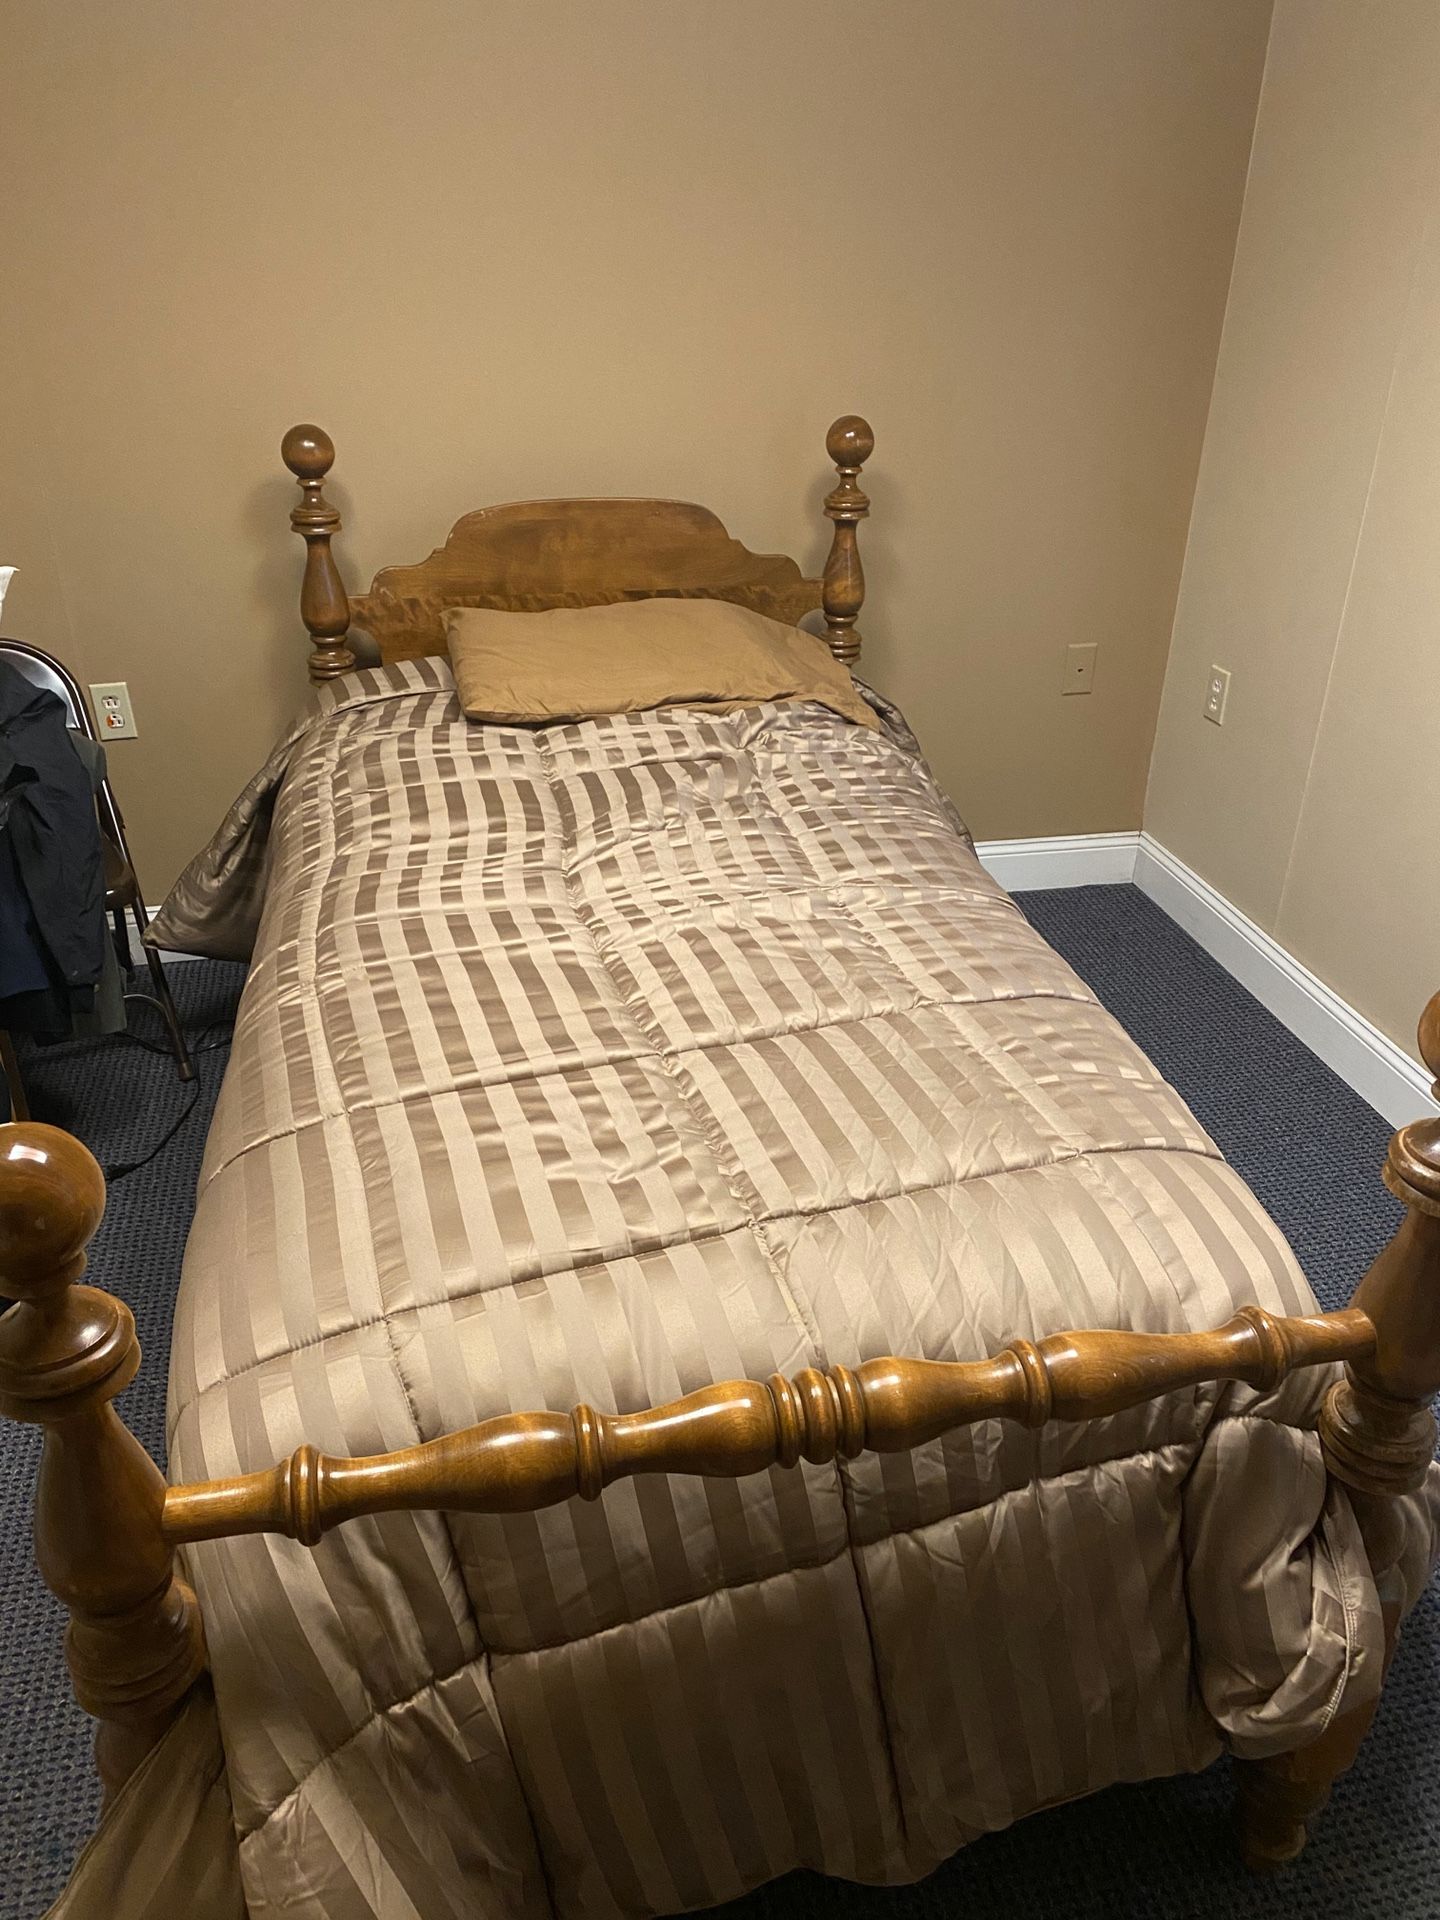 Single Bed (mattress, box spring, and frame)